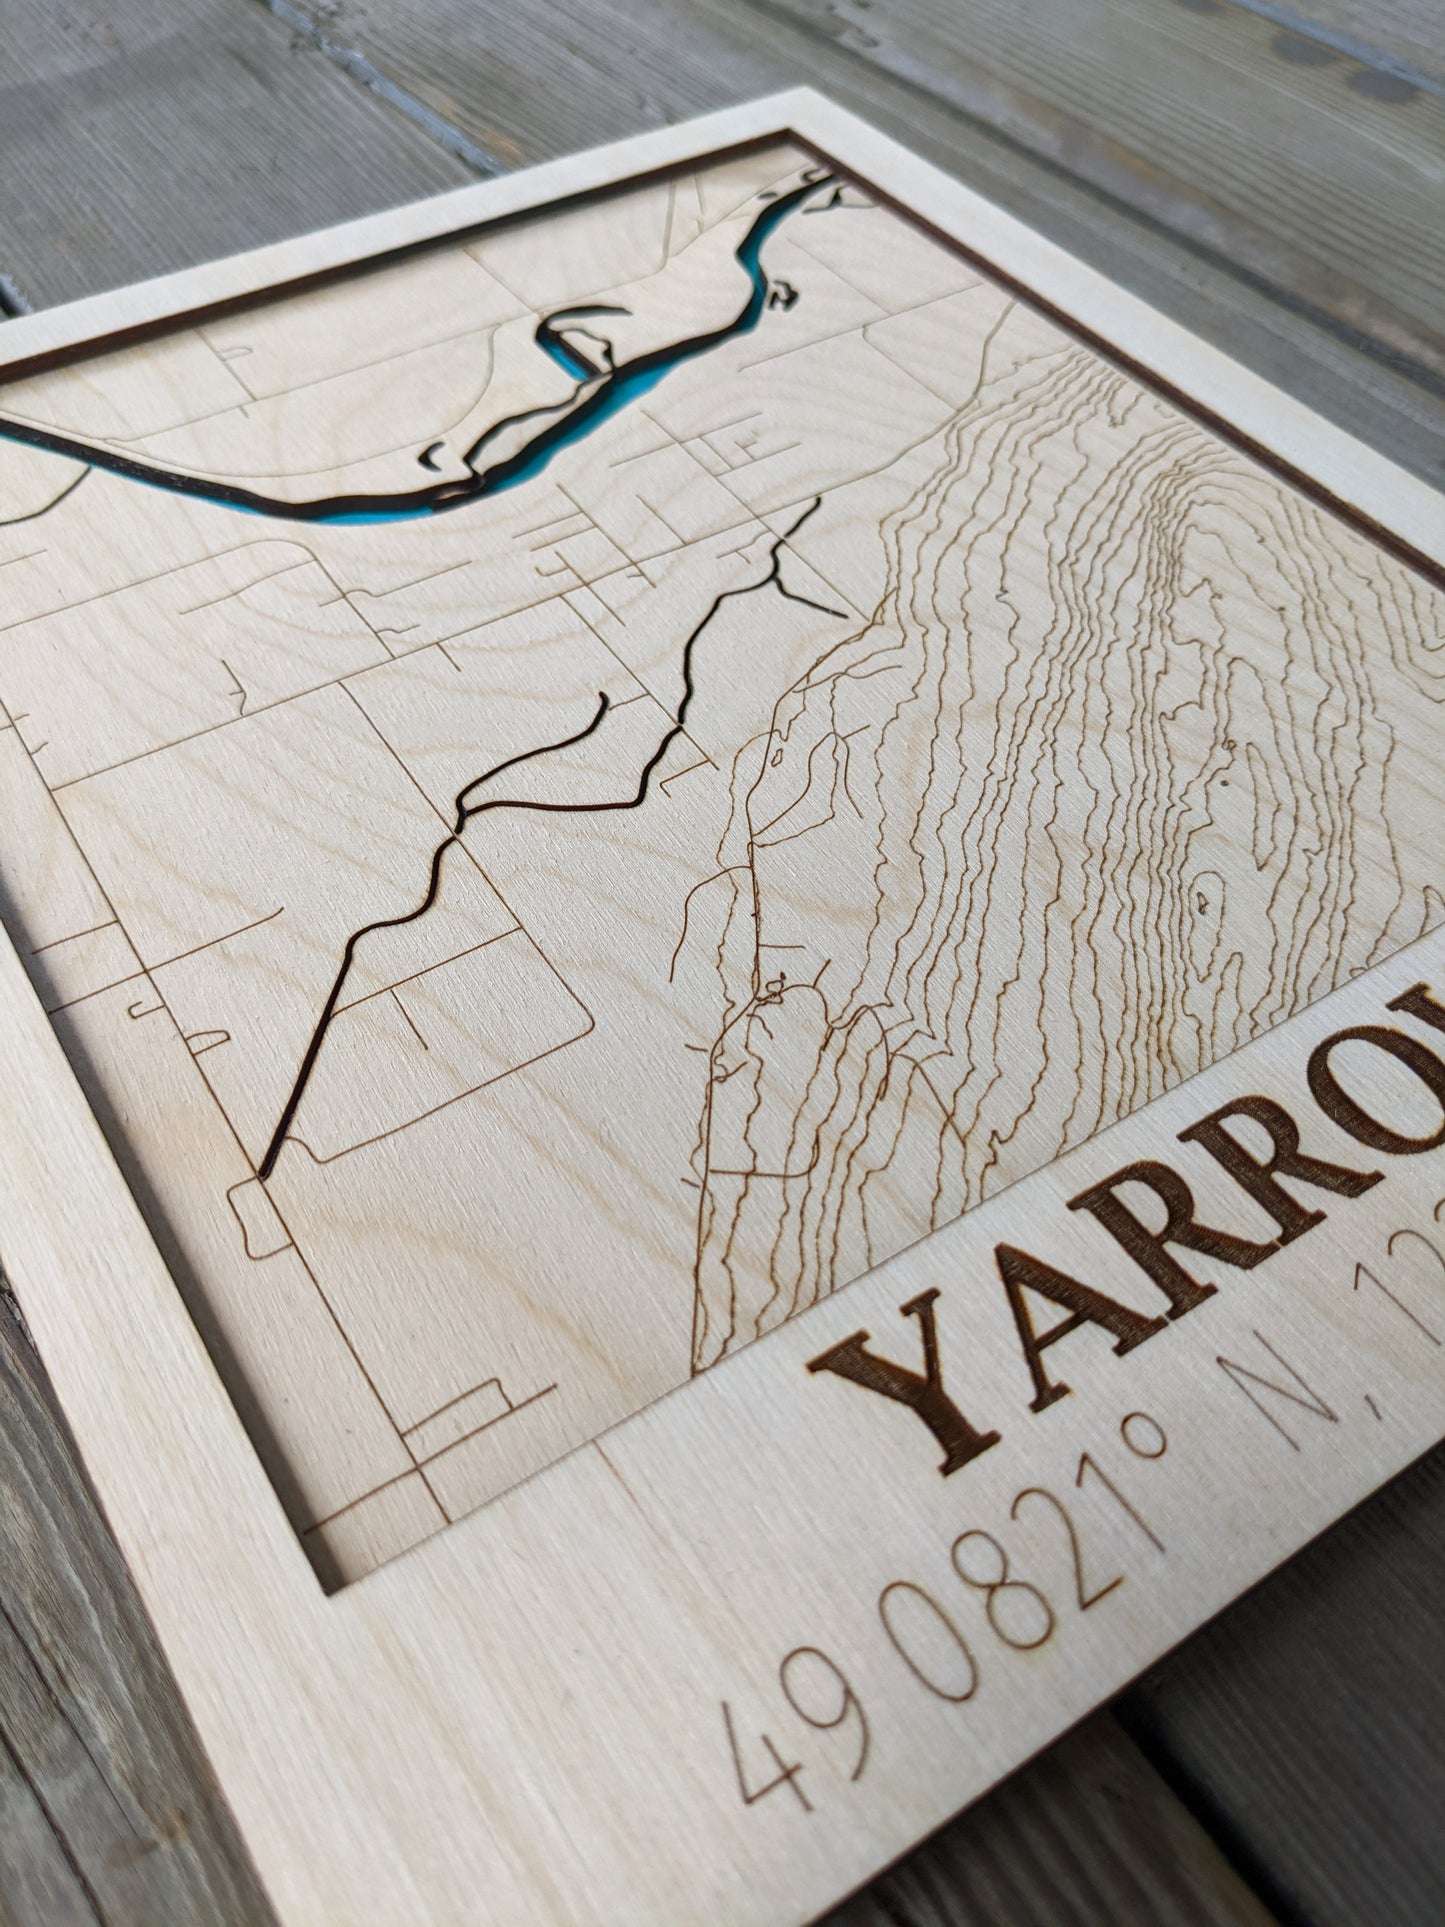 Yarrow Wooden Topographic Map Map 50.00